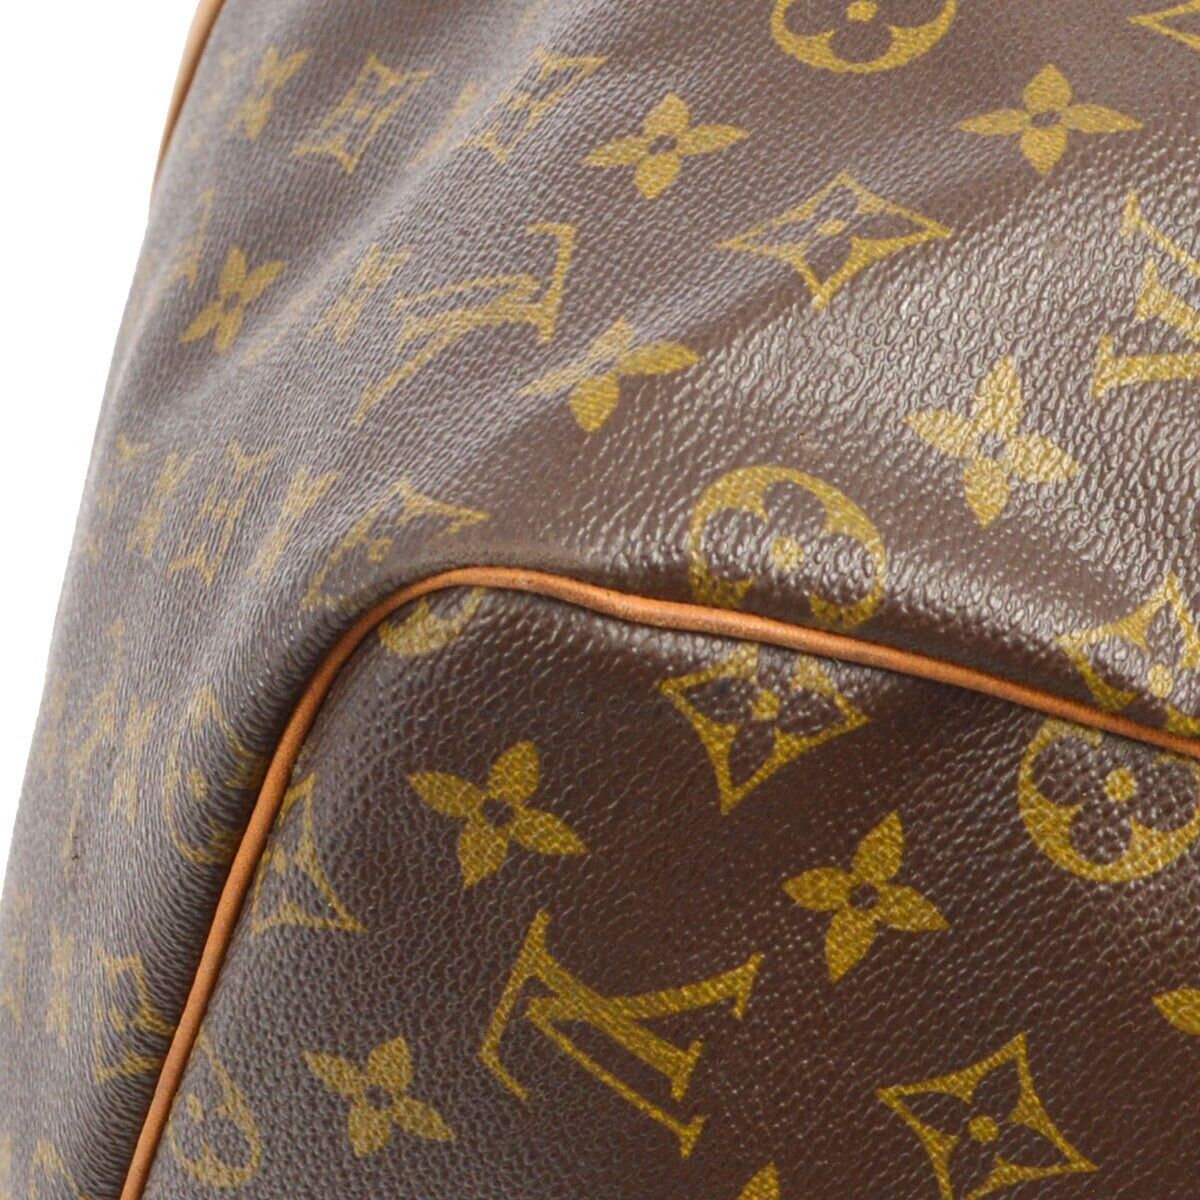 BUY NOW (50% Off for Subscribers) Louis Vuitton Monogram Keepall 55